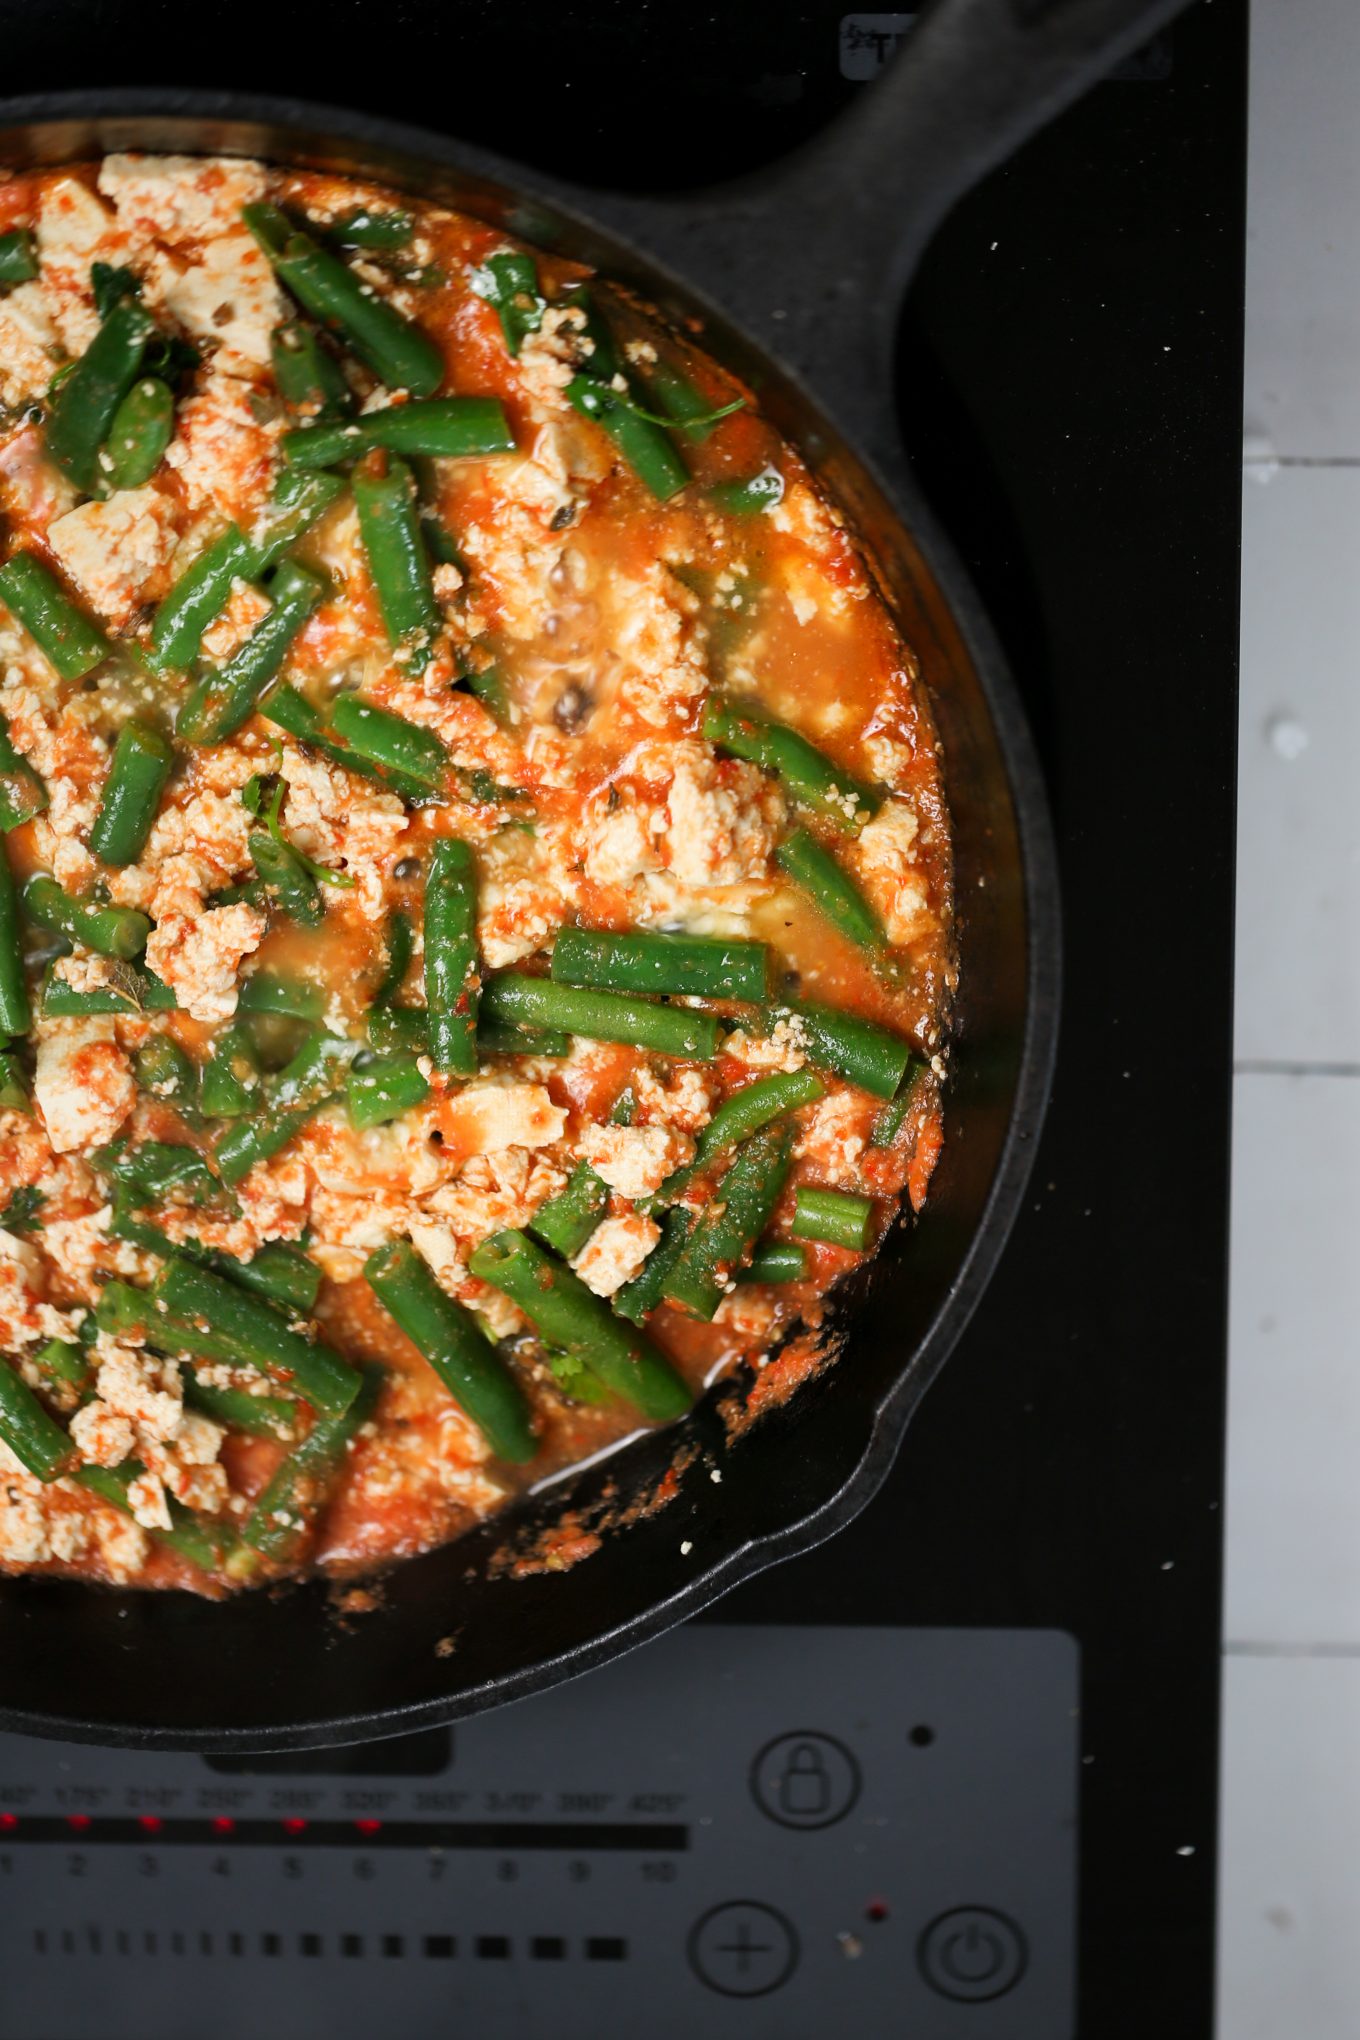 cooked green beans, tofu and red sauce